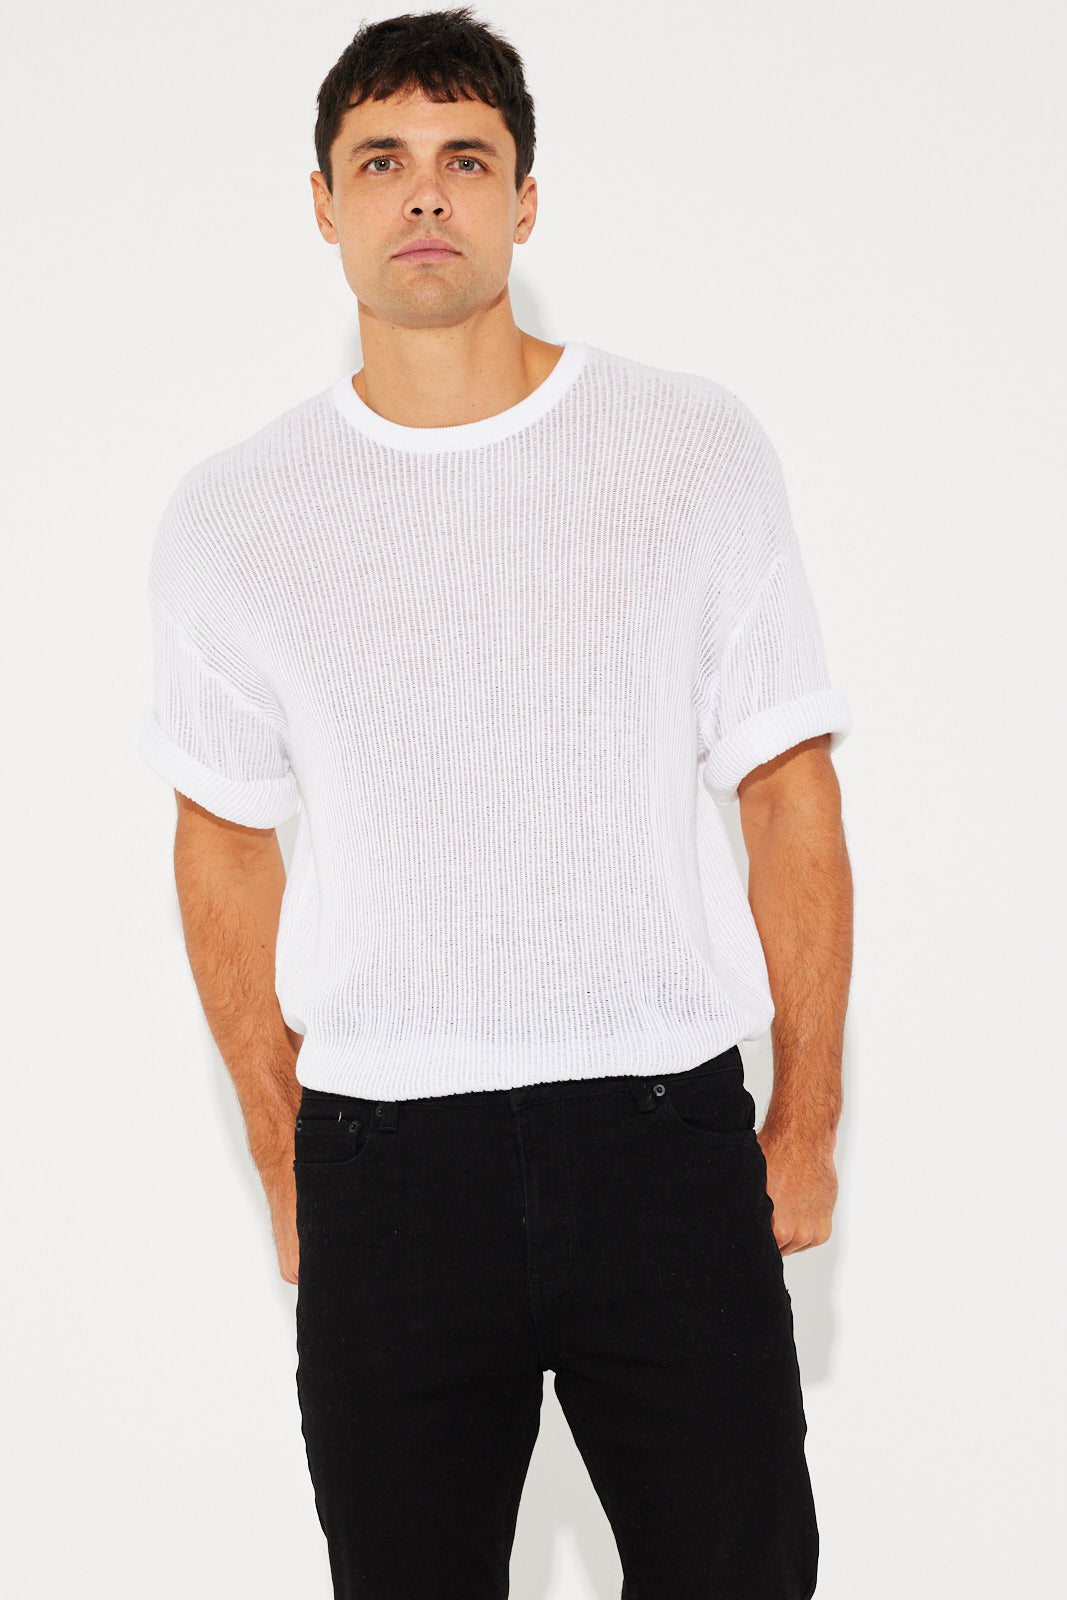 NTH Knitted Crew Tee White - FINAL SALE